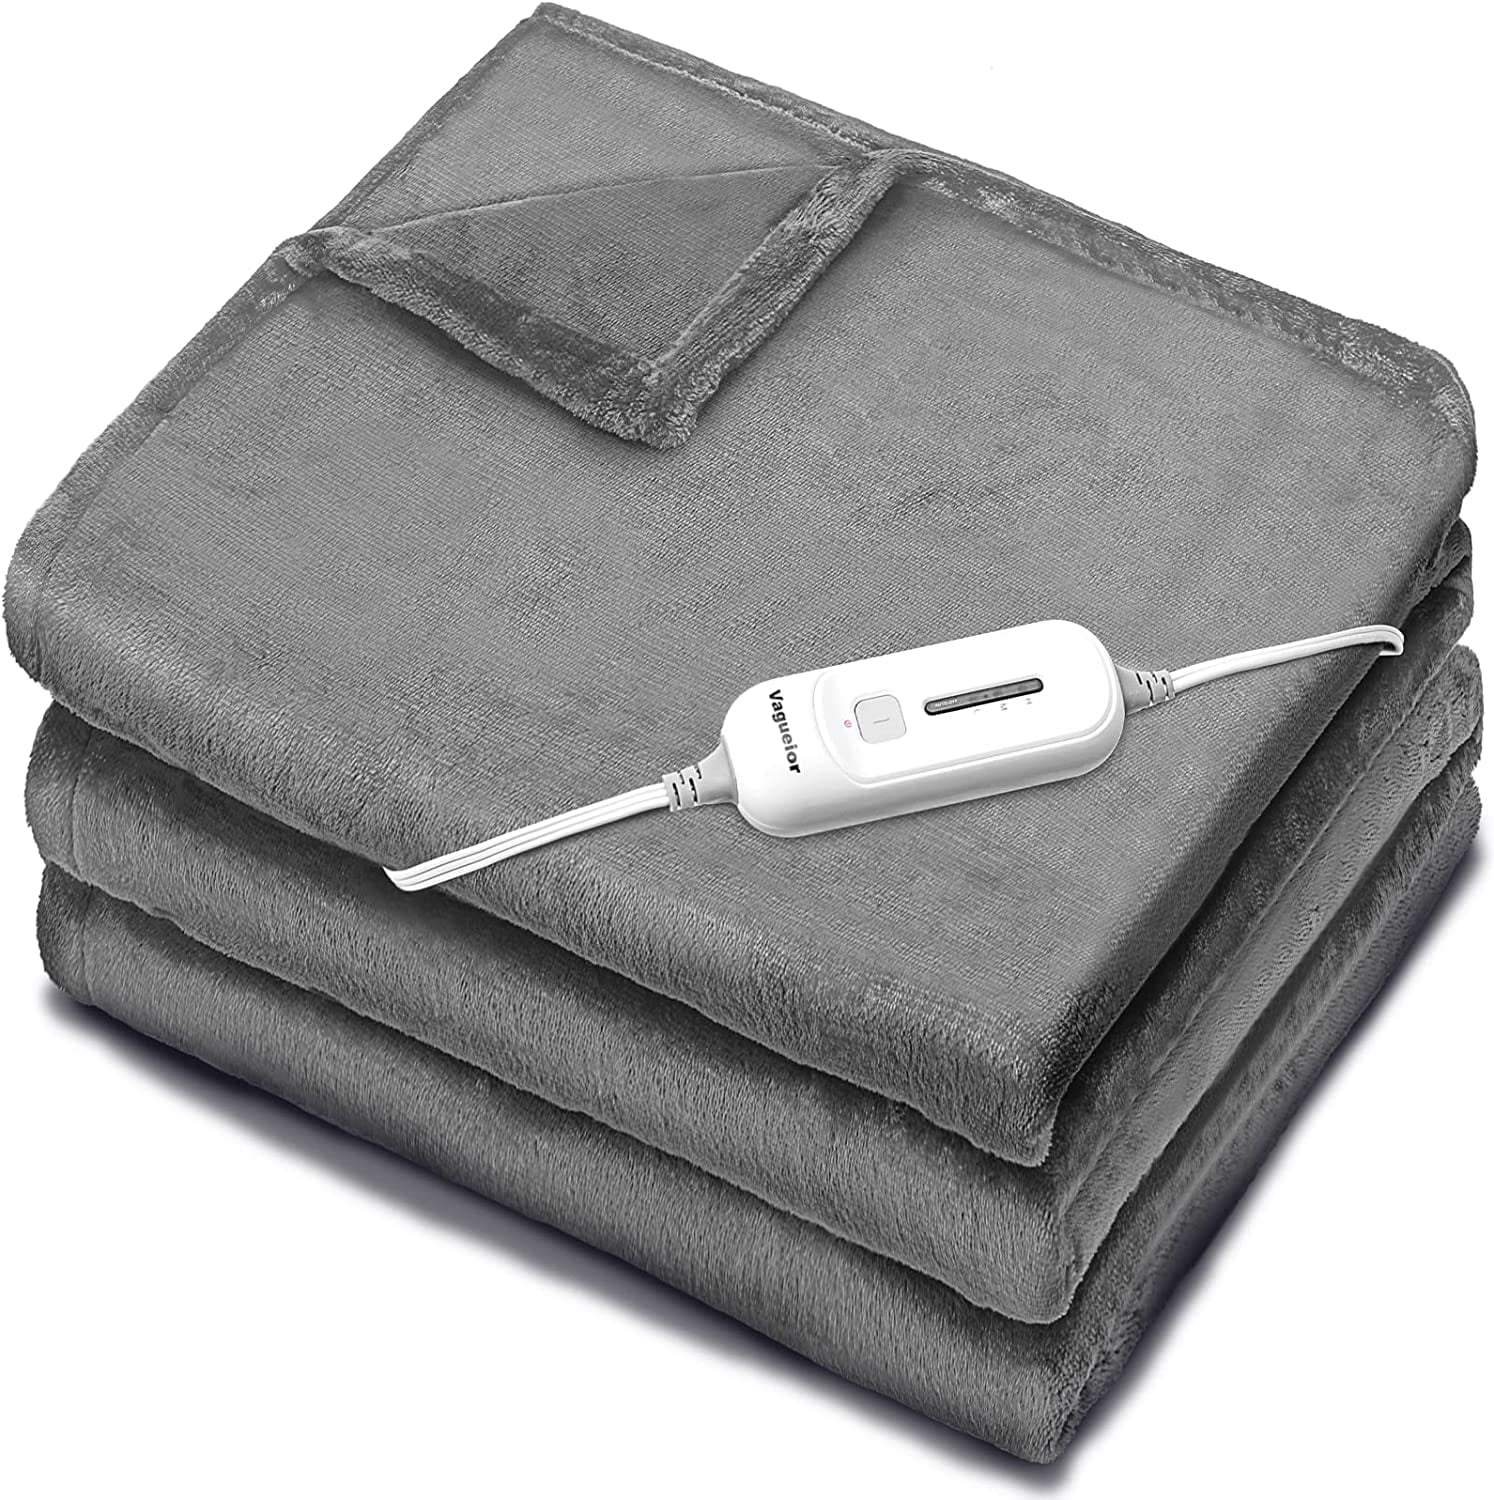  Vagueior Electric Heated Blanket Full Size 72'' x 84